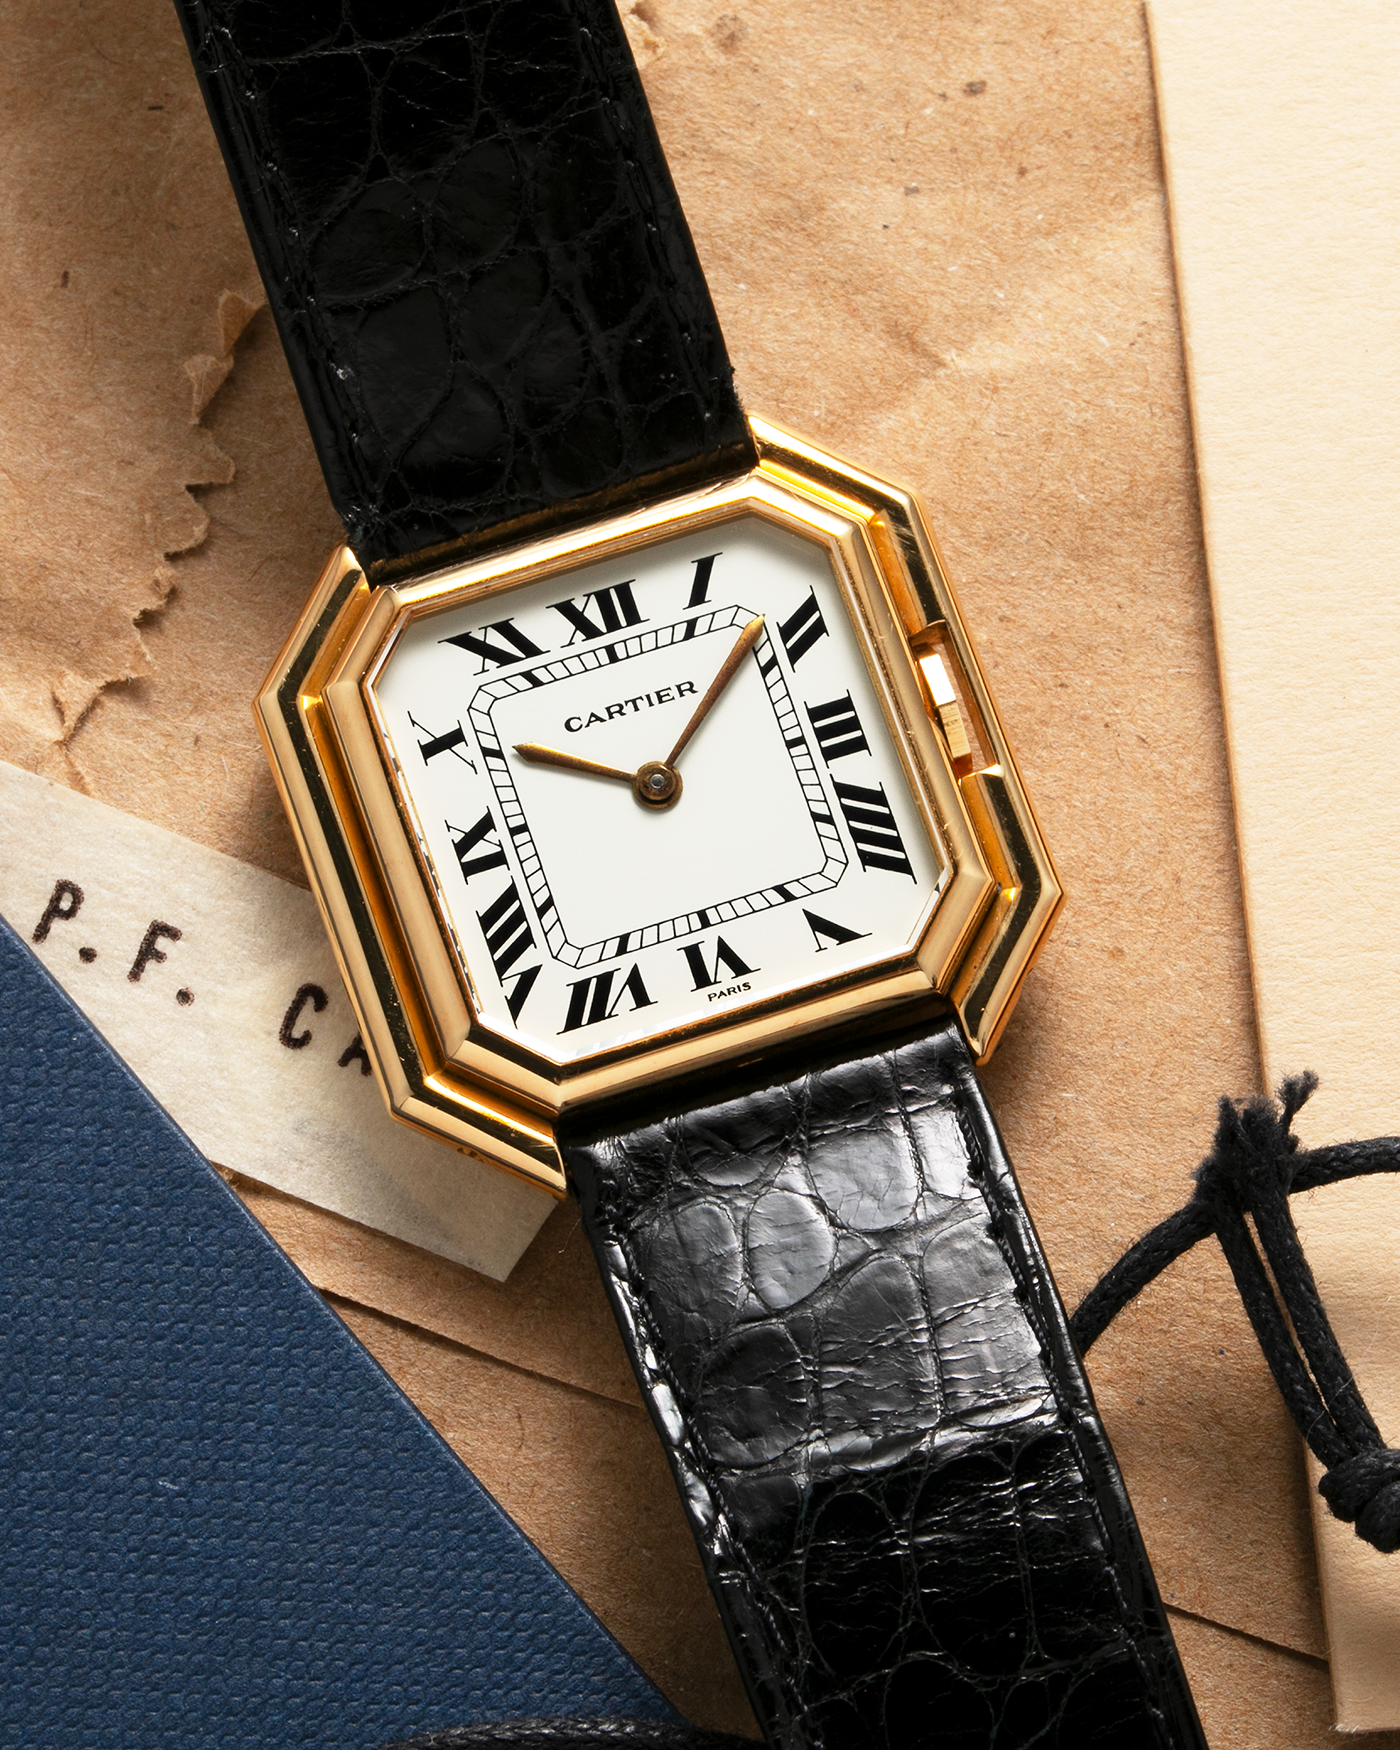 Brand: Cartier Year: 1970s Model: Ceinture ‘Jumbo’ Reference Number: AS03953 Material: 18-carat Yellow Gold Movement: Cartier Cal. 78.1. Manual-Winding Case Diameter: 31mm x 33mm Strap: Cartier Black Textured Leather Strap with Signed 18-carat Yellow Gold